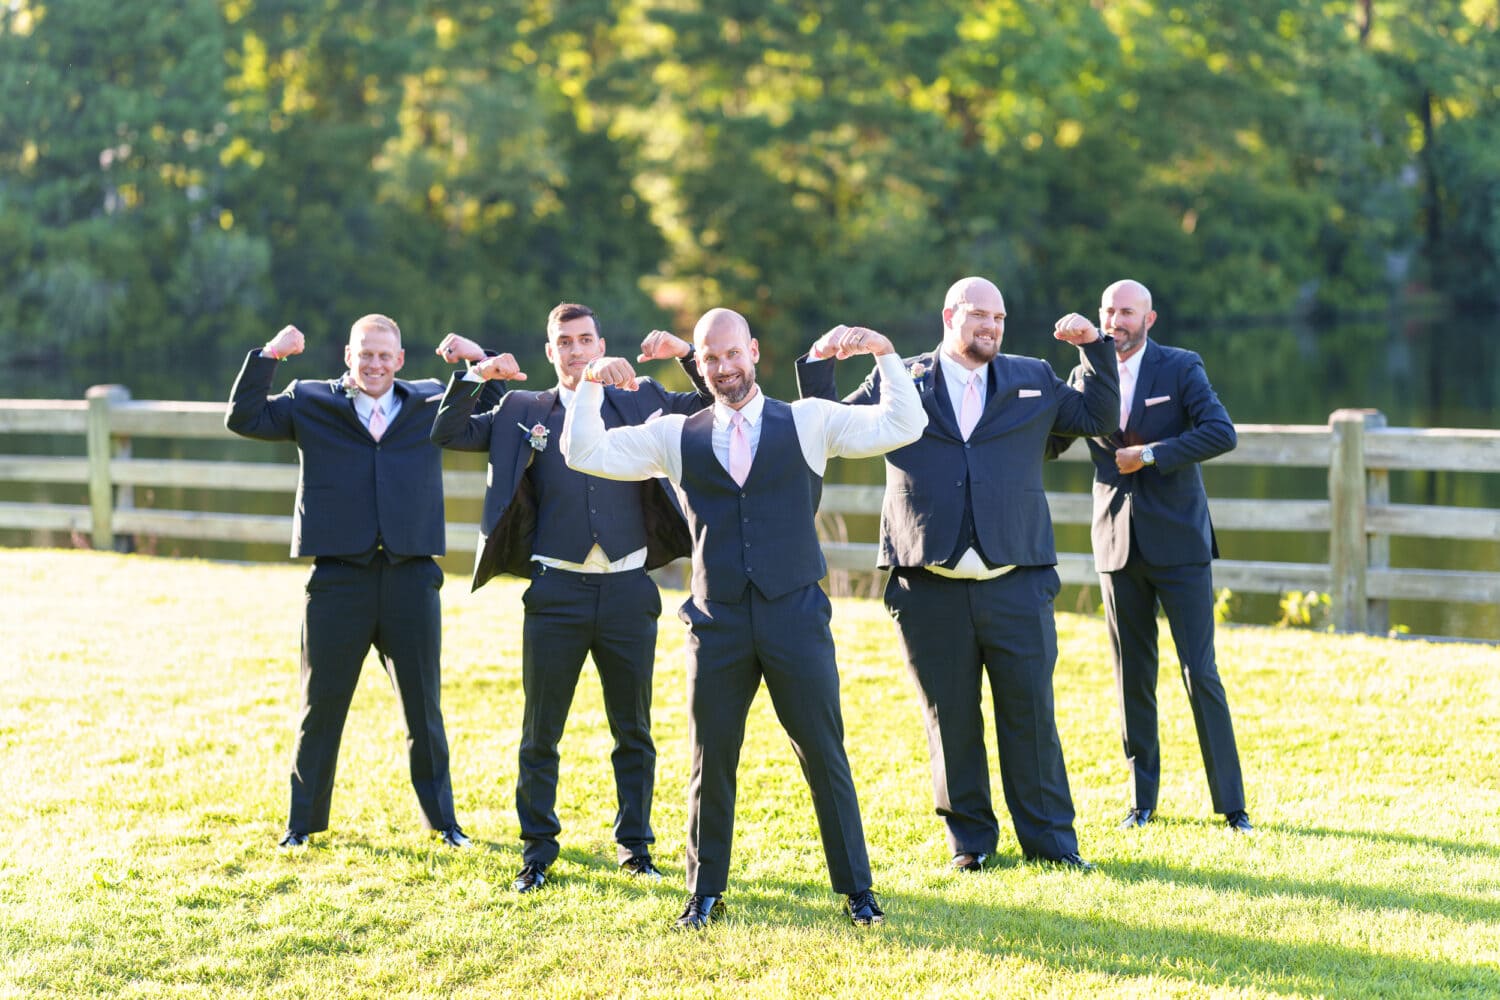 Bodybuilding groom showing off his muscles with the groomsmen - The Pavilion at Pepper Plantation